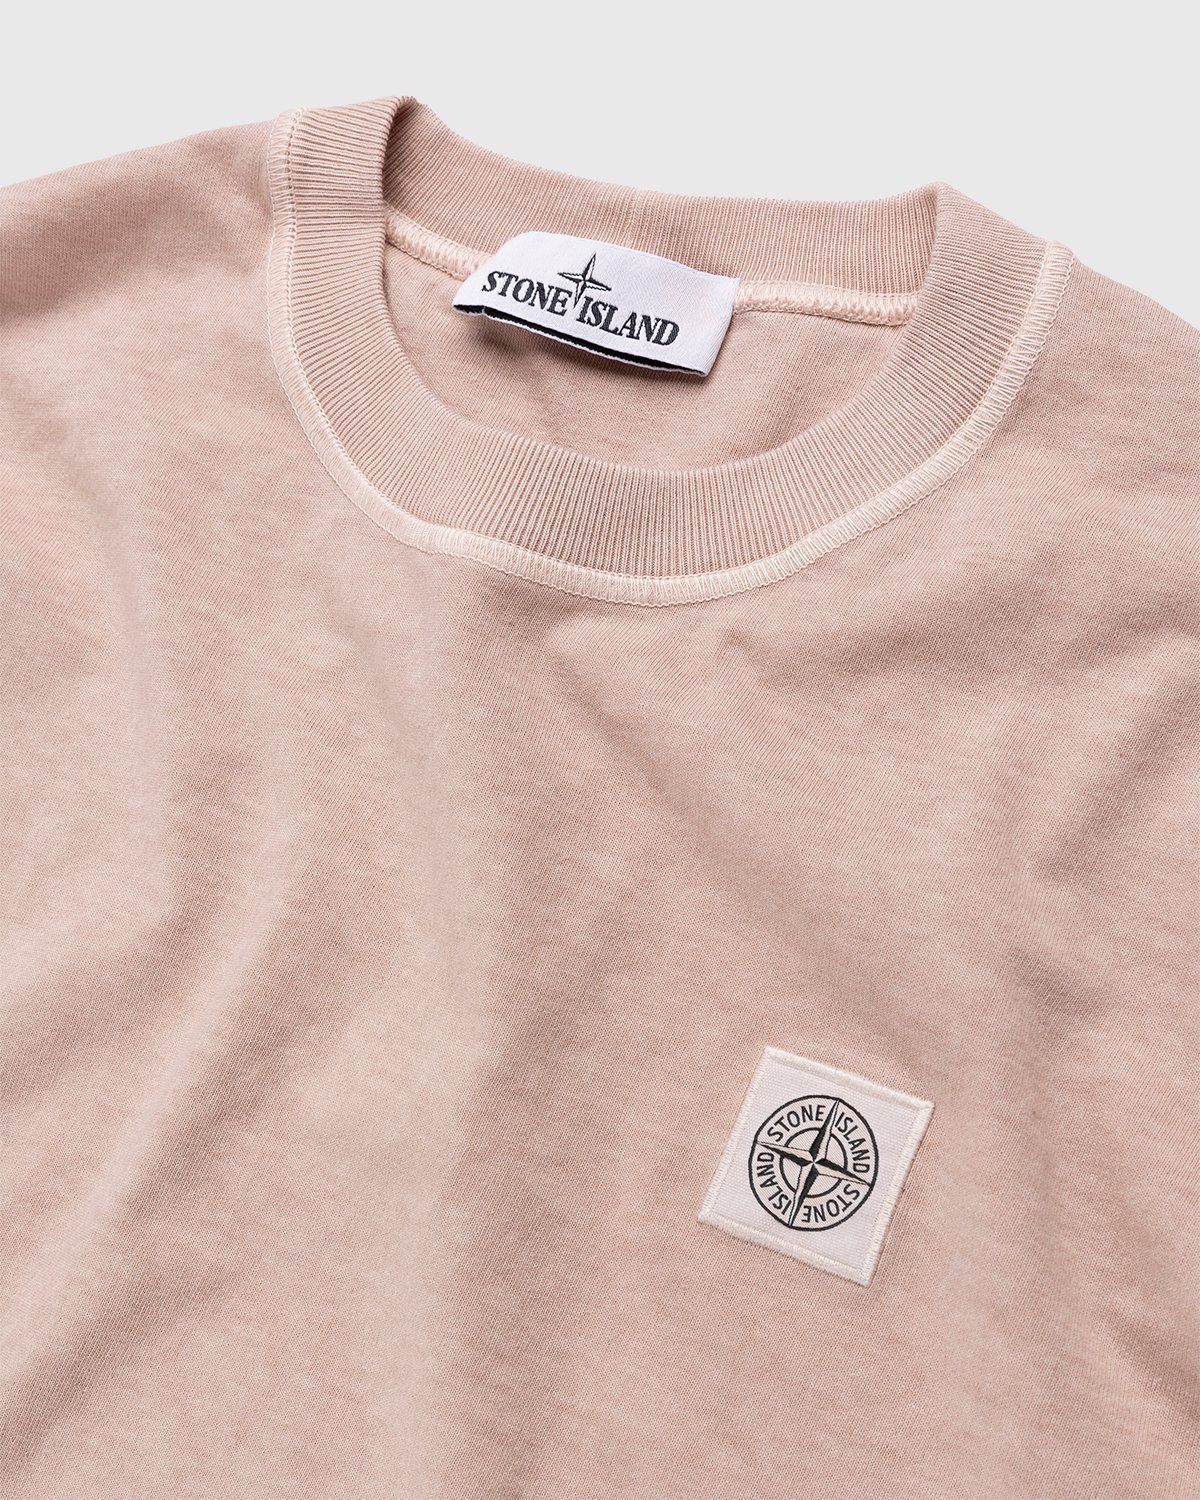 Stone Island - T-Shirt Rustic Rose - Clothing - Red - Image 4